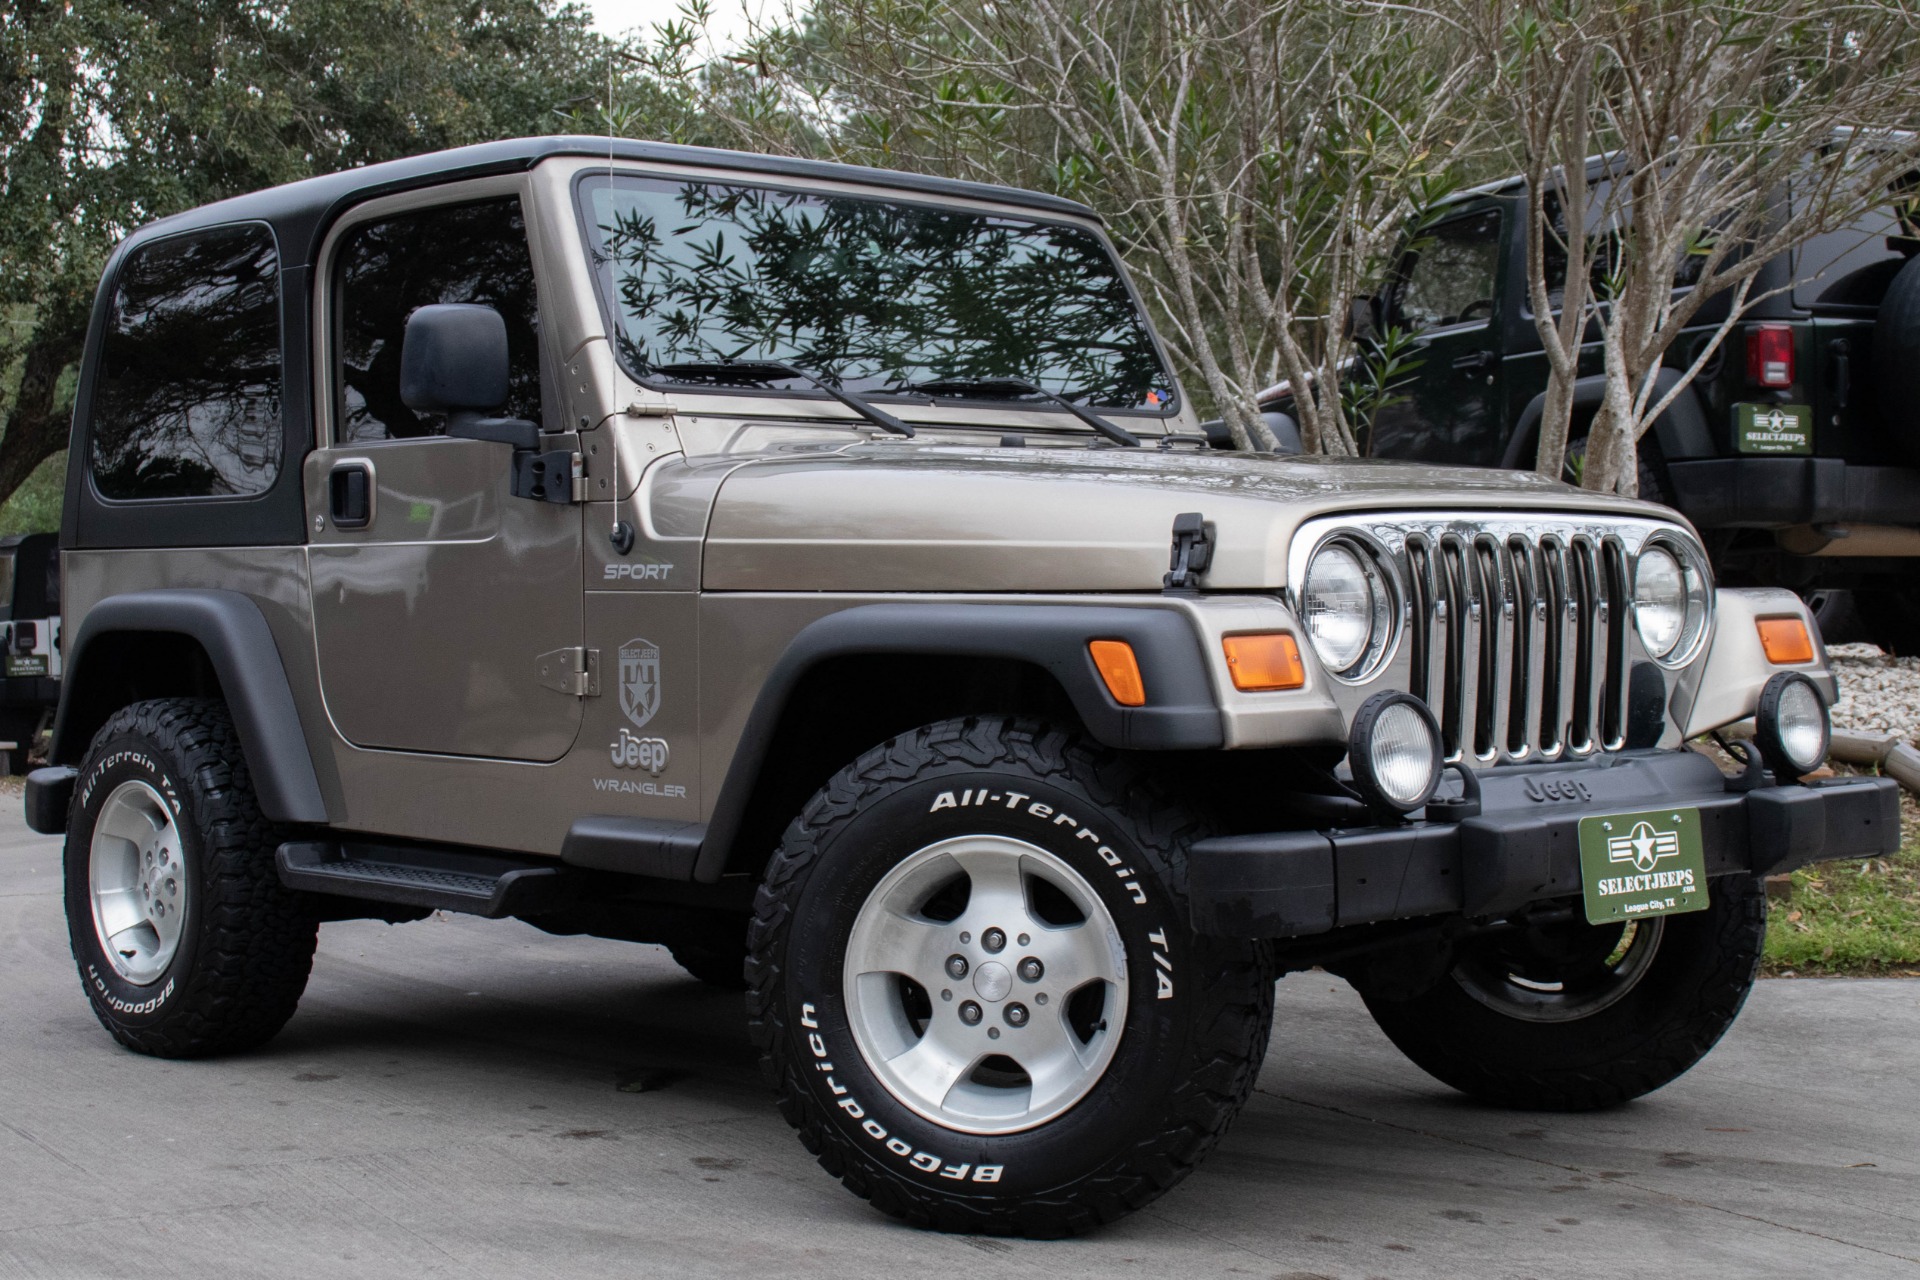 Used 2003 Jeep Wrangler Sport For Sale ($13,995) | Select Jeeps Inc. Stock  #370956